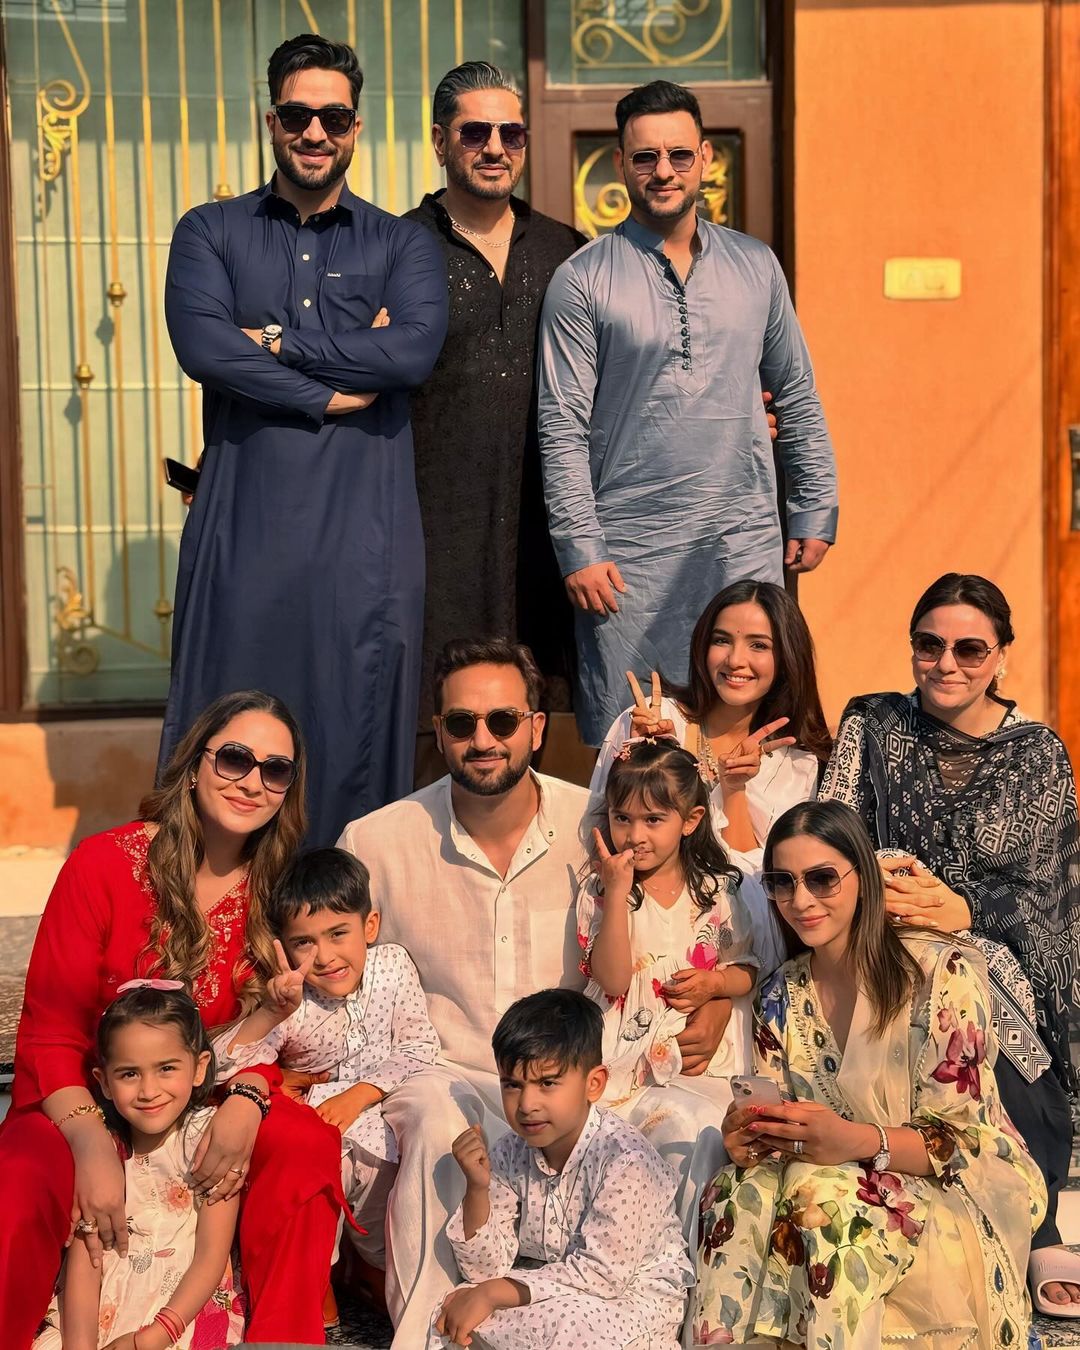 Home Is Where The Heart Is! Our Telly World’s Handsome Aly Goni Dropped Beautiful Eid Pictures With Family. Does His Darling Join With Them?  